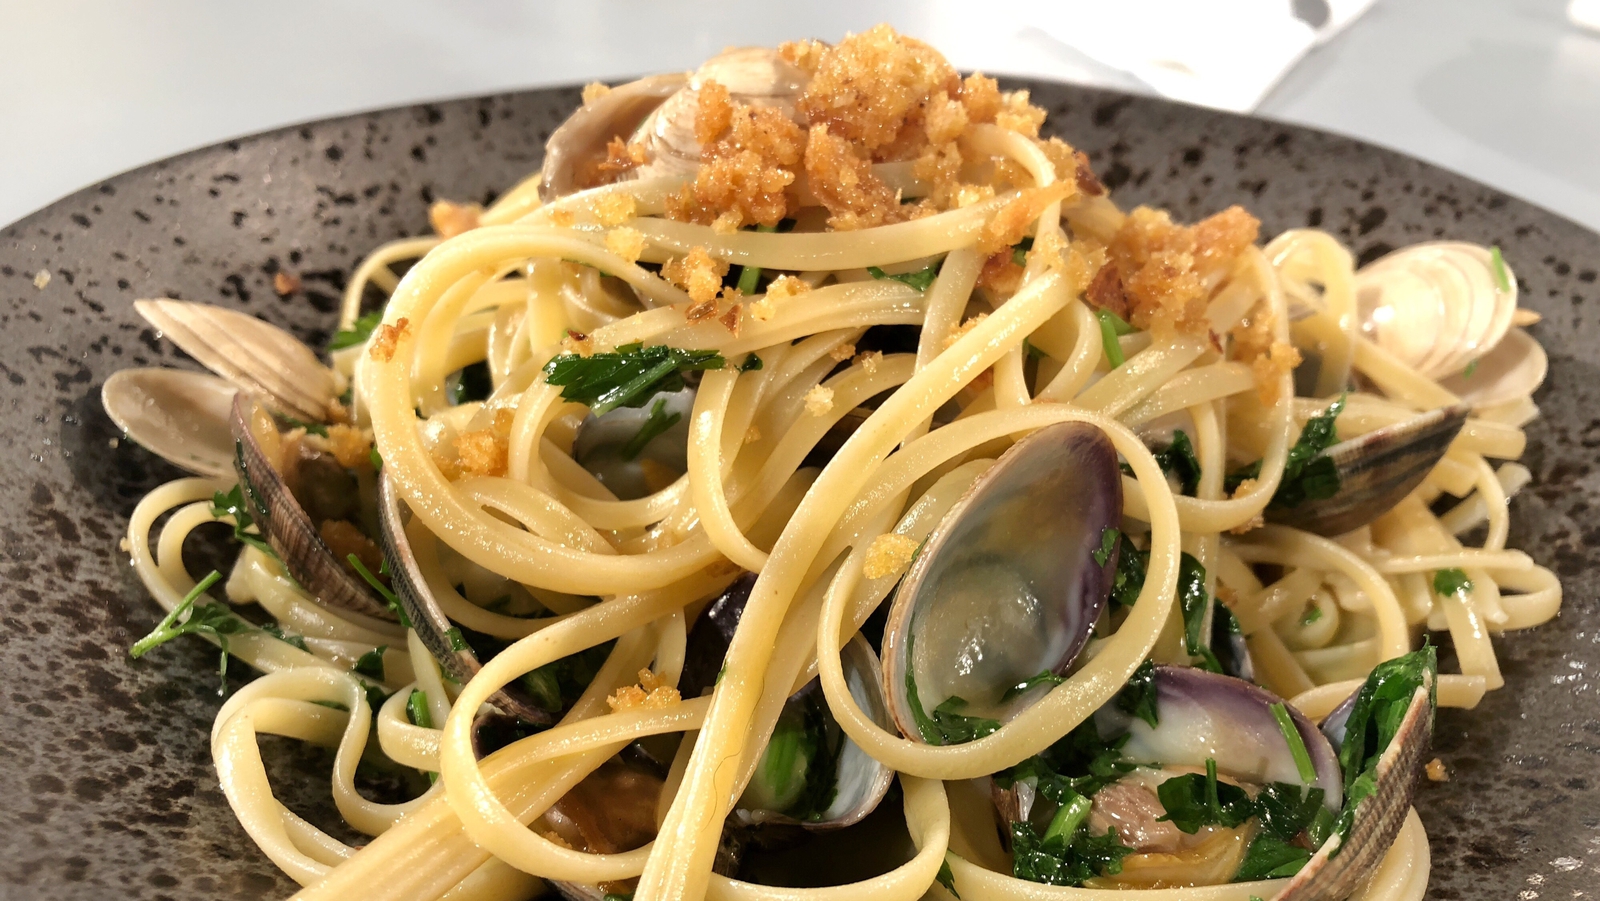 Niall Sabongi's Linguine Alle Vongole: Today